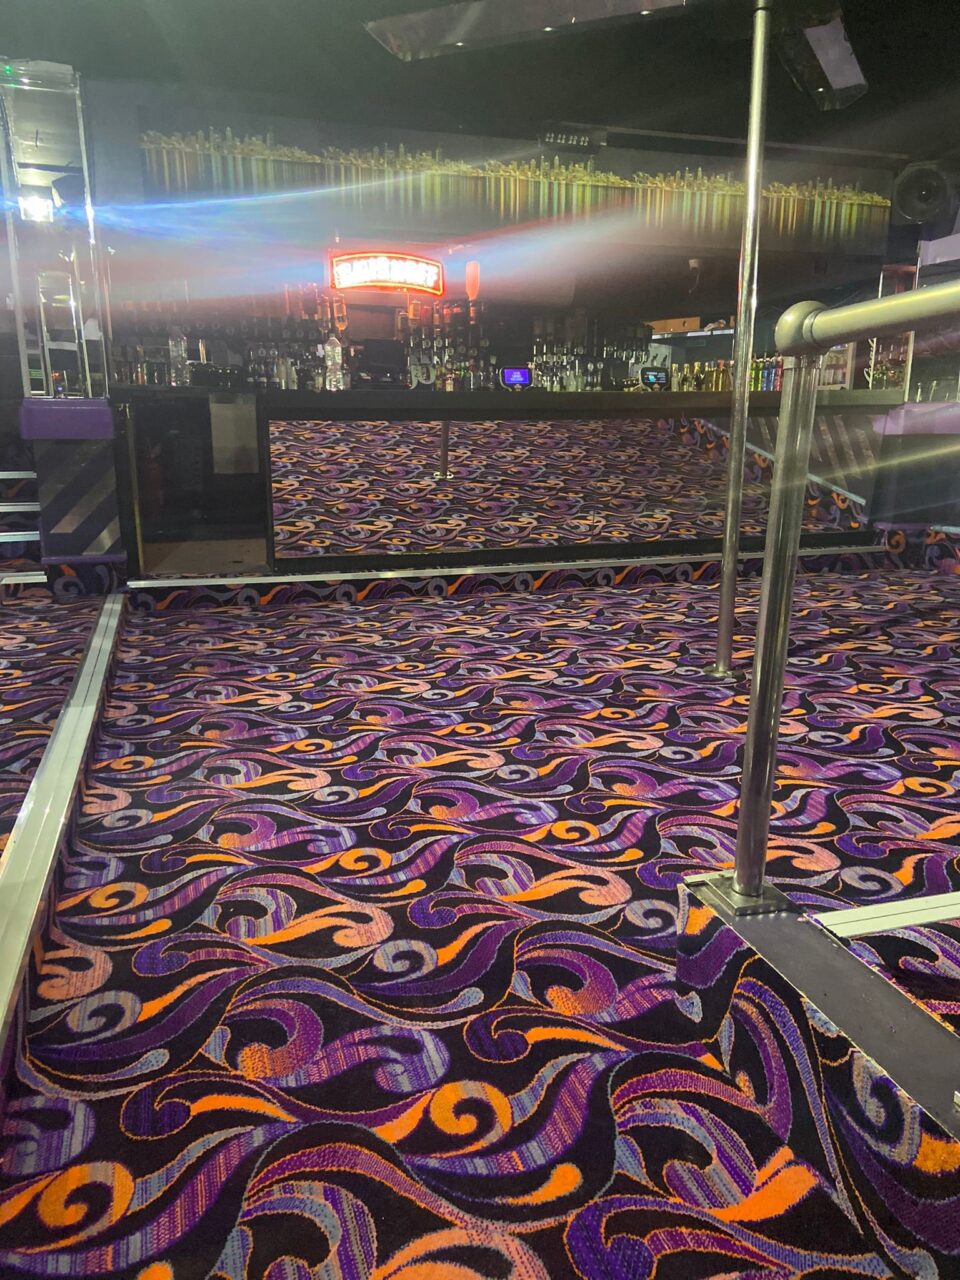 Acapulco Nightclub Halifax bar with bespoke purple and black patterned carpets designed by Wilton Carpets